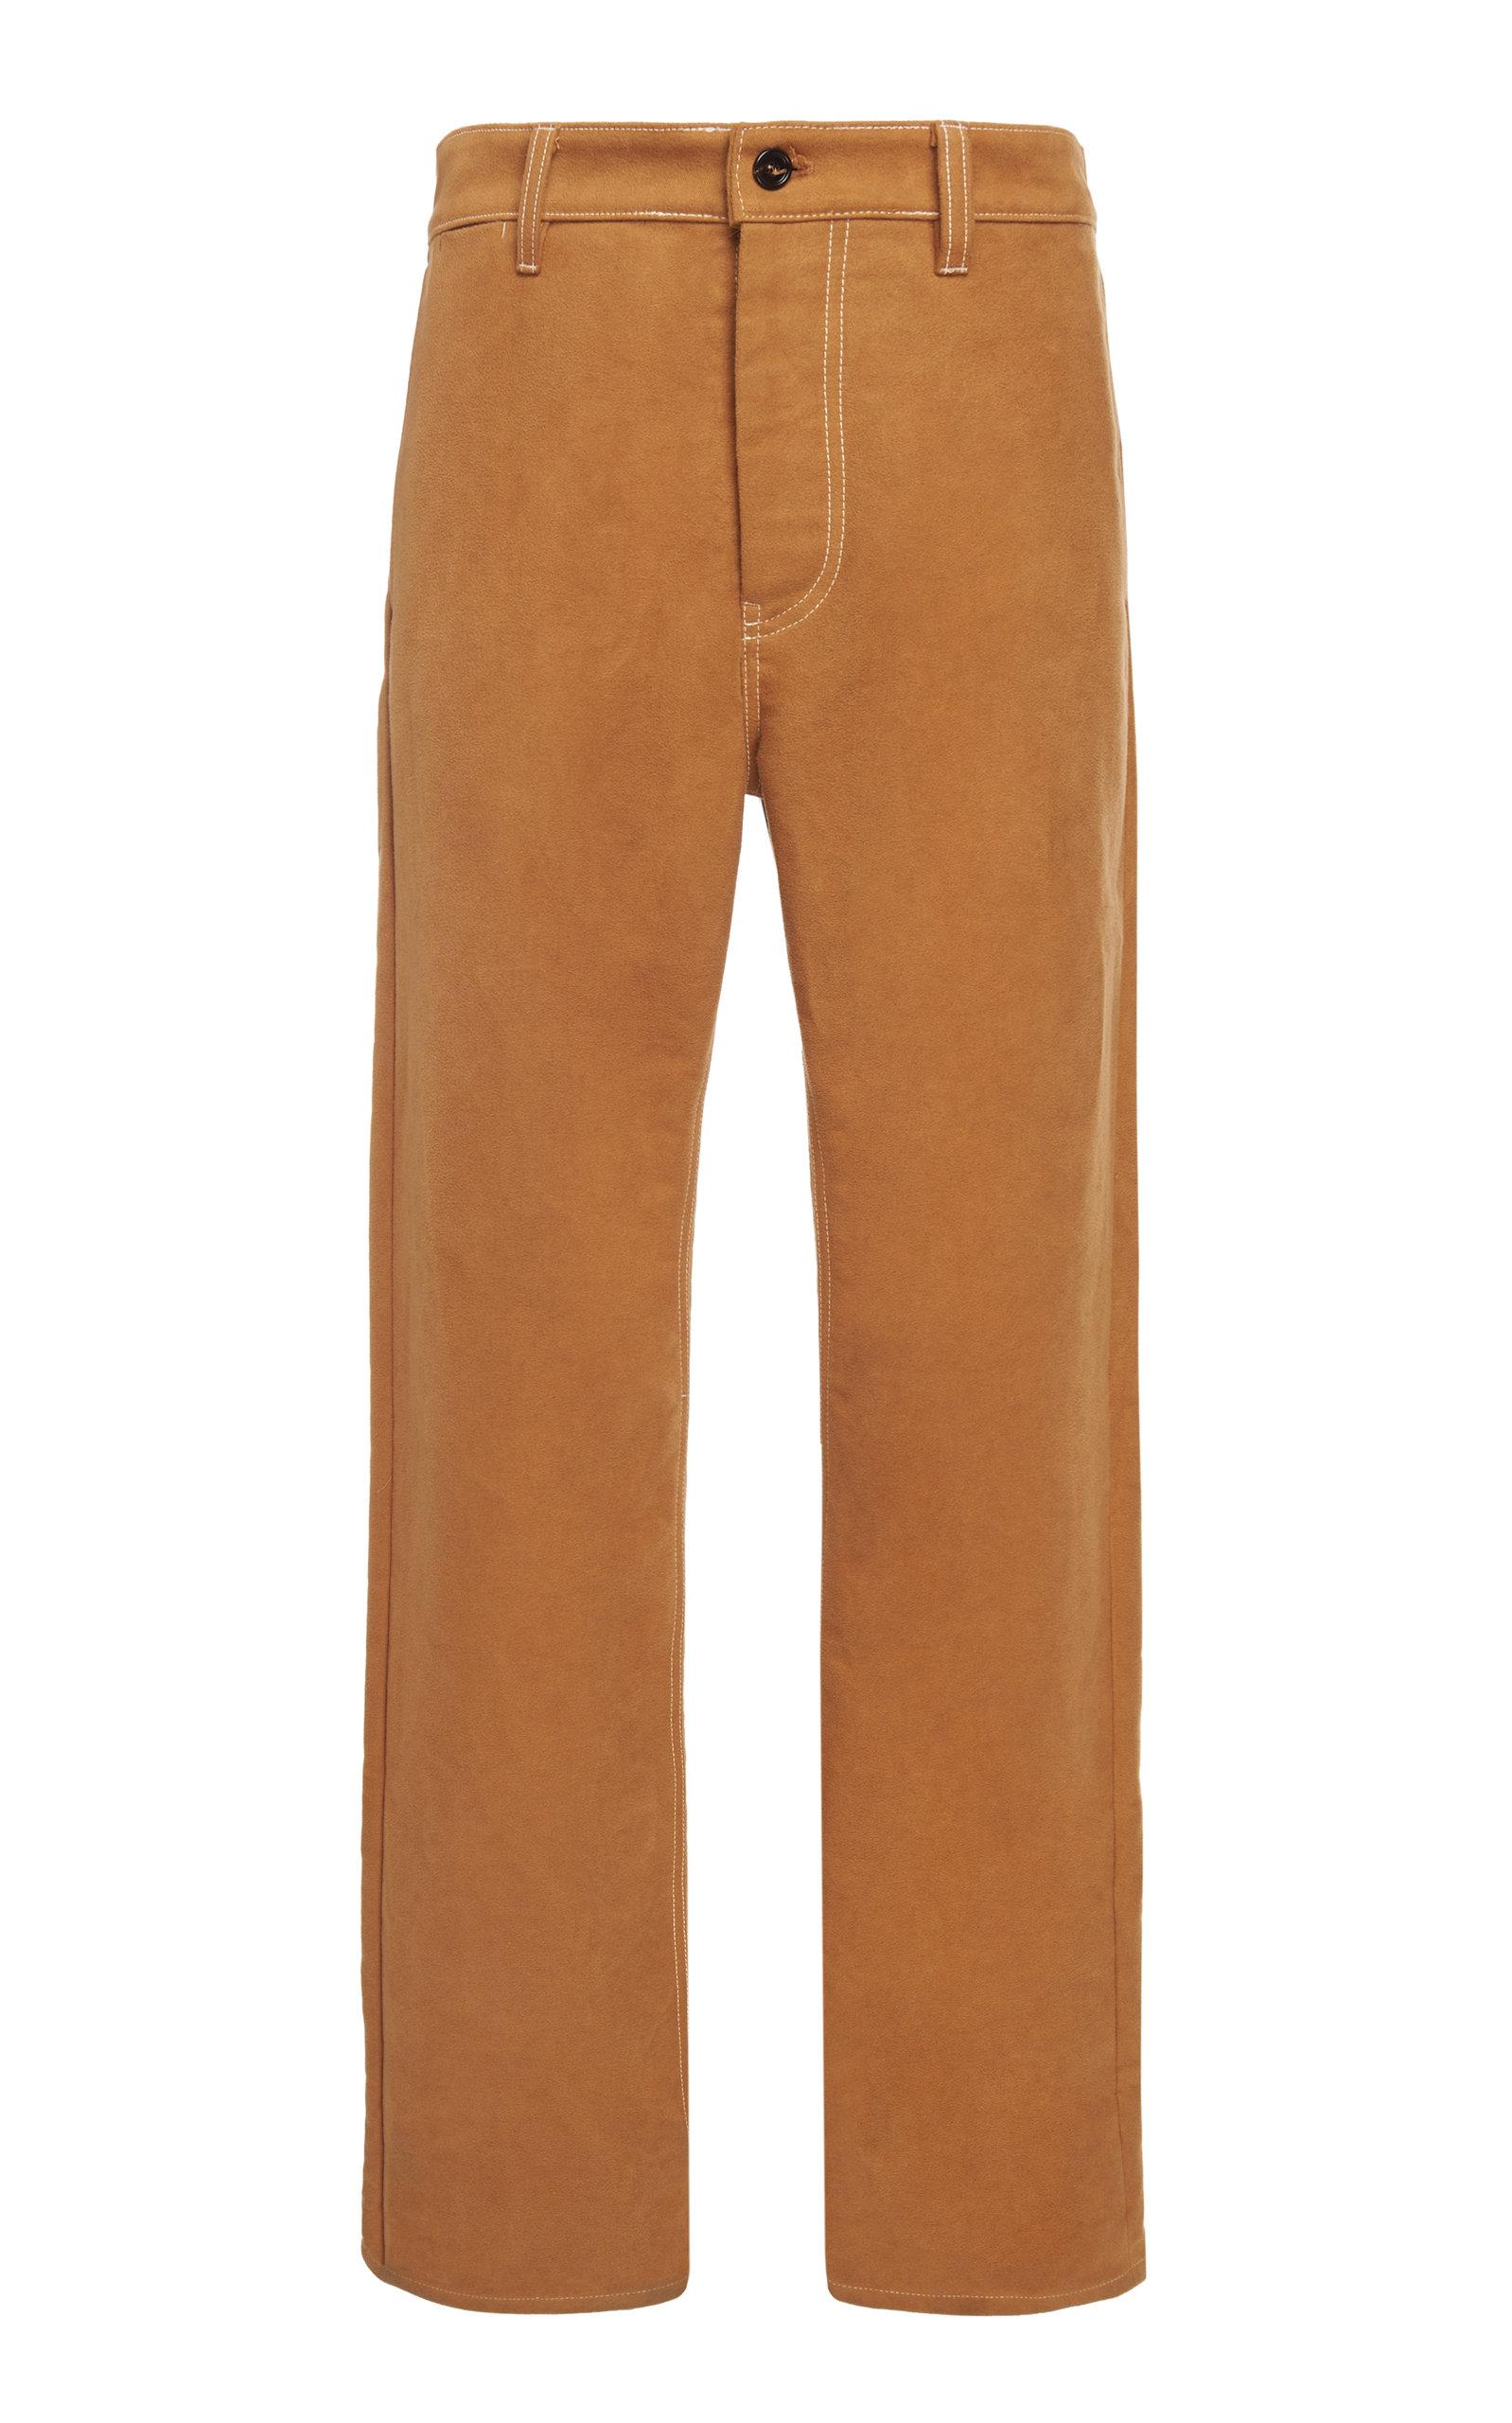 Marni Wide Leg Cotton Pants in Brown for Men - Lyst